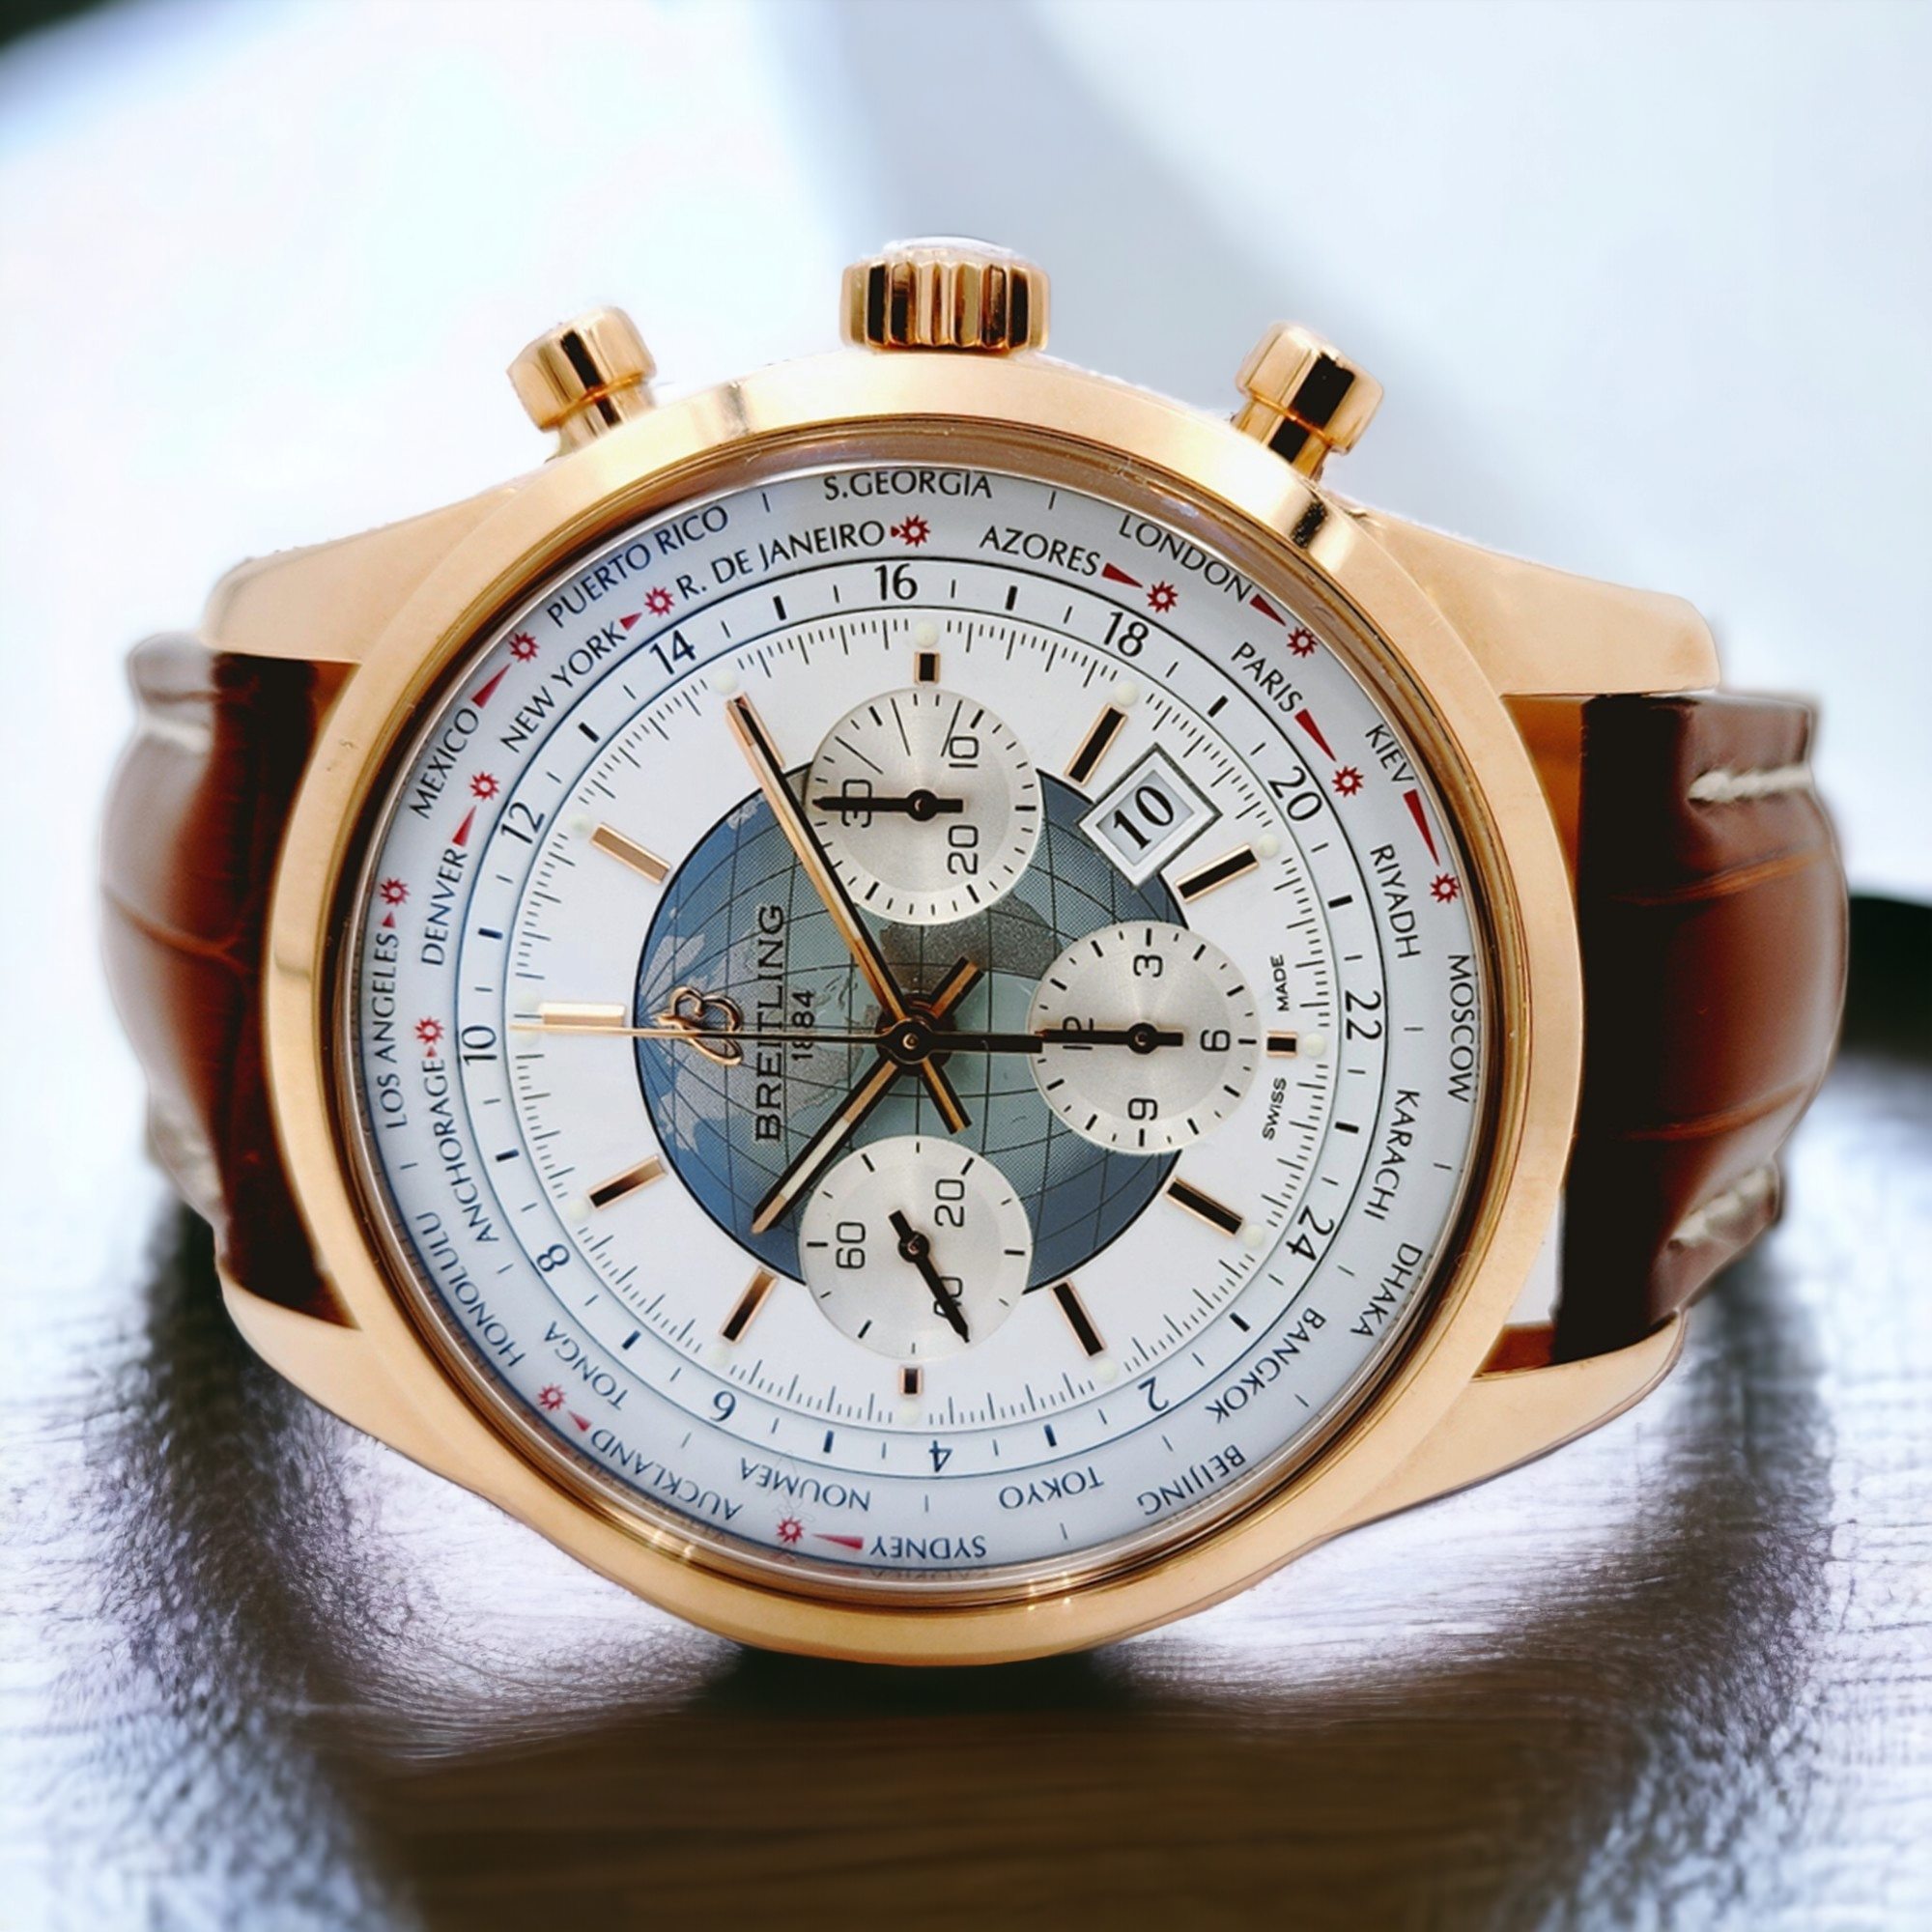 *Men's Breitling 46mm Transocean Watch in 18K Rose Gold with Brown Leather Band and White Chronograph Dial. (Pre-Owned)